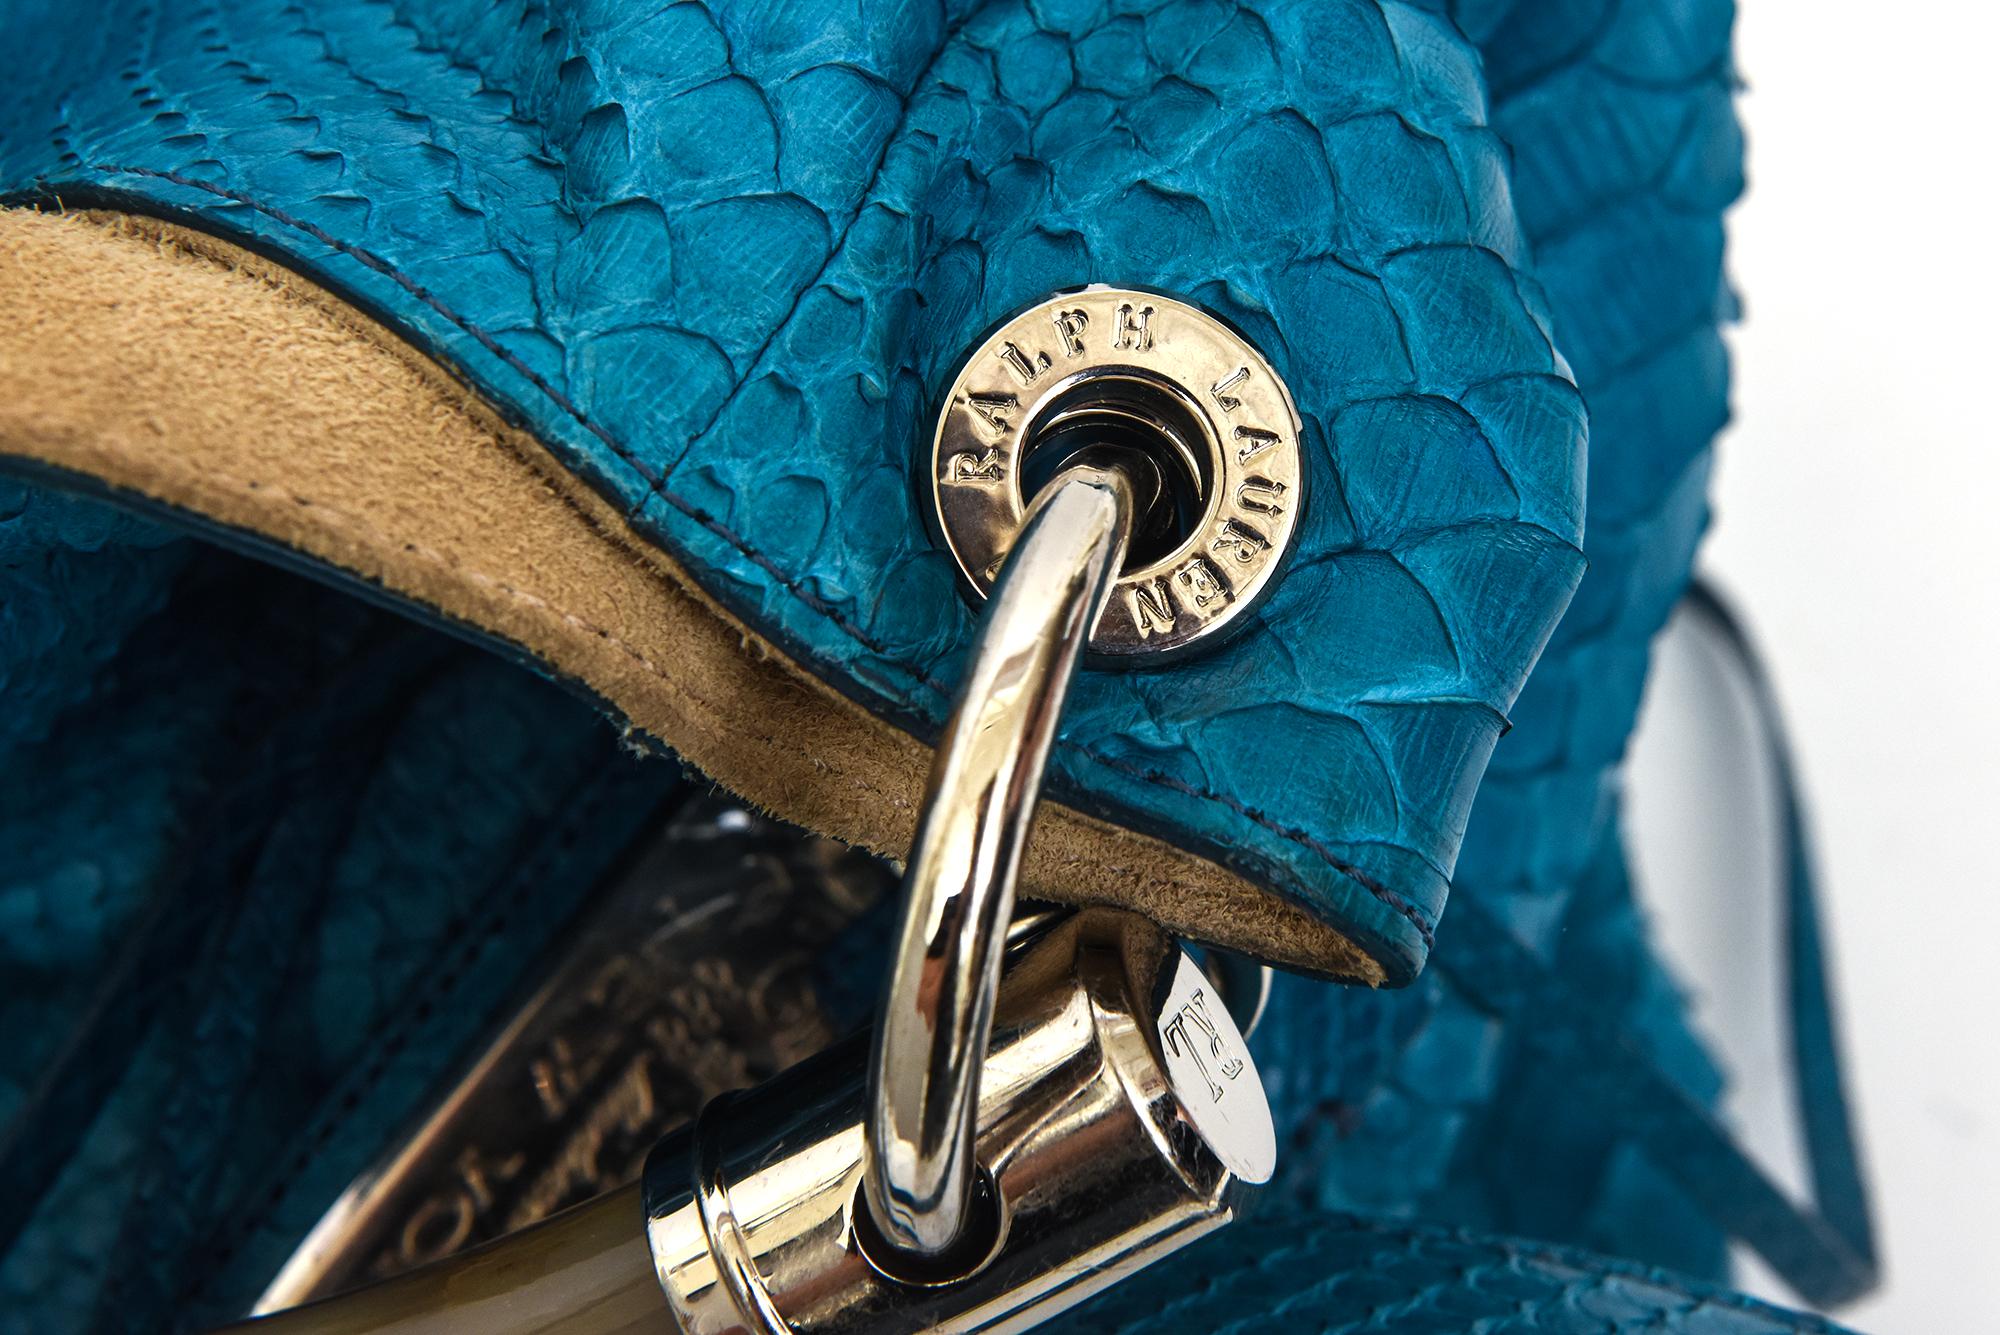 Ralph Lauren Turquoise Python Arm and Shoulder Bag With Bone LIke Top Handle For Sale 5